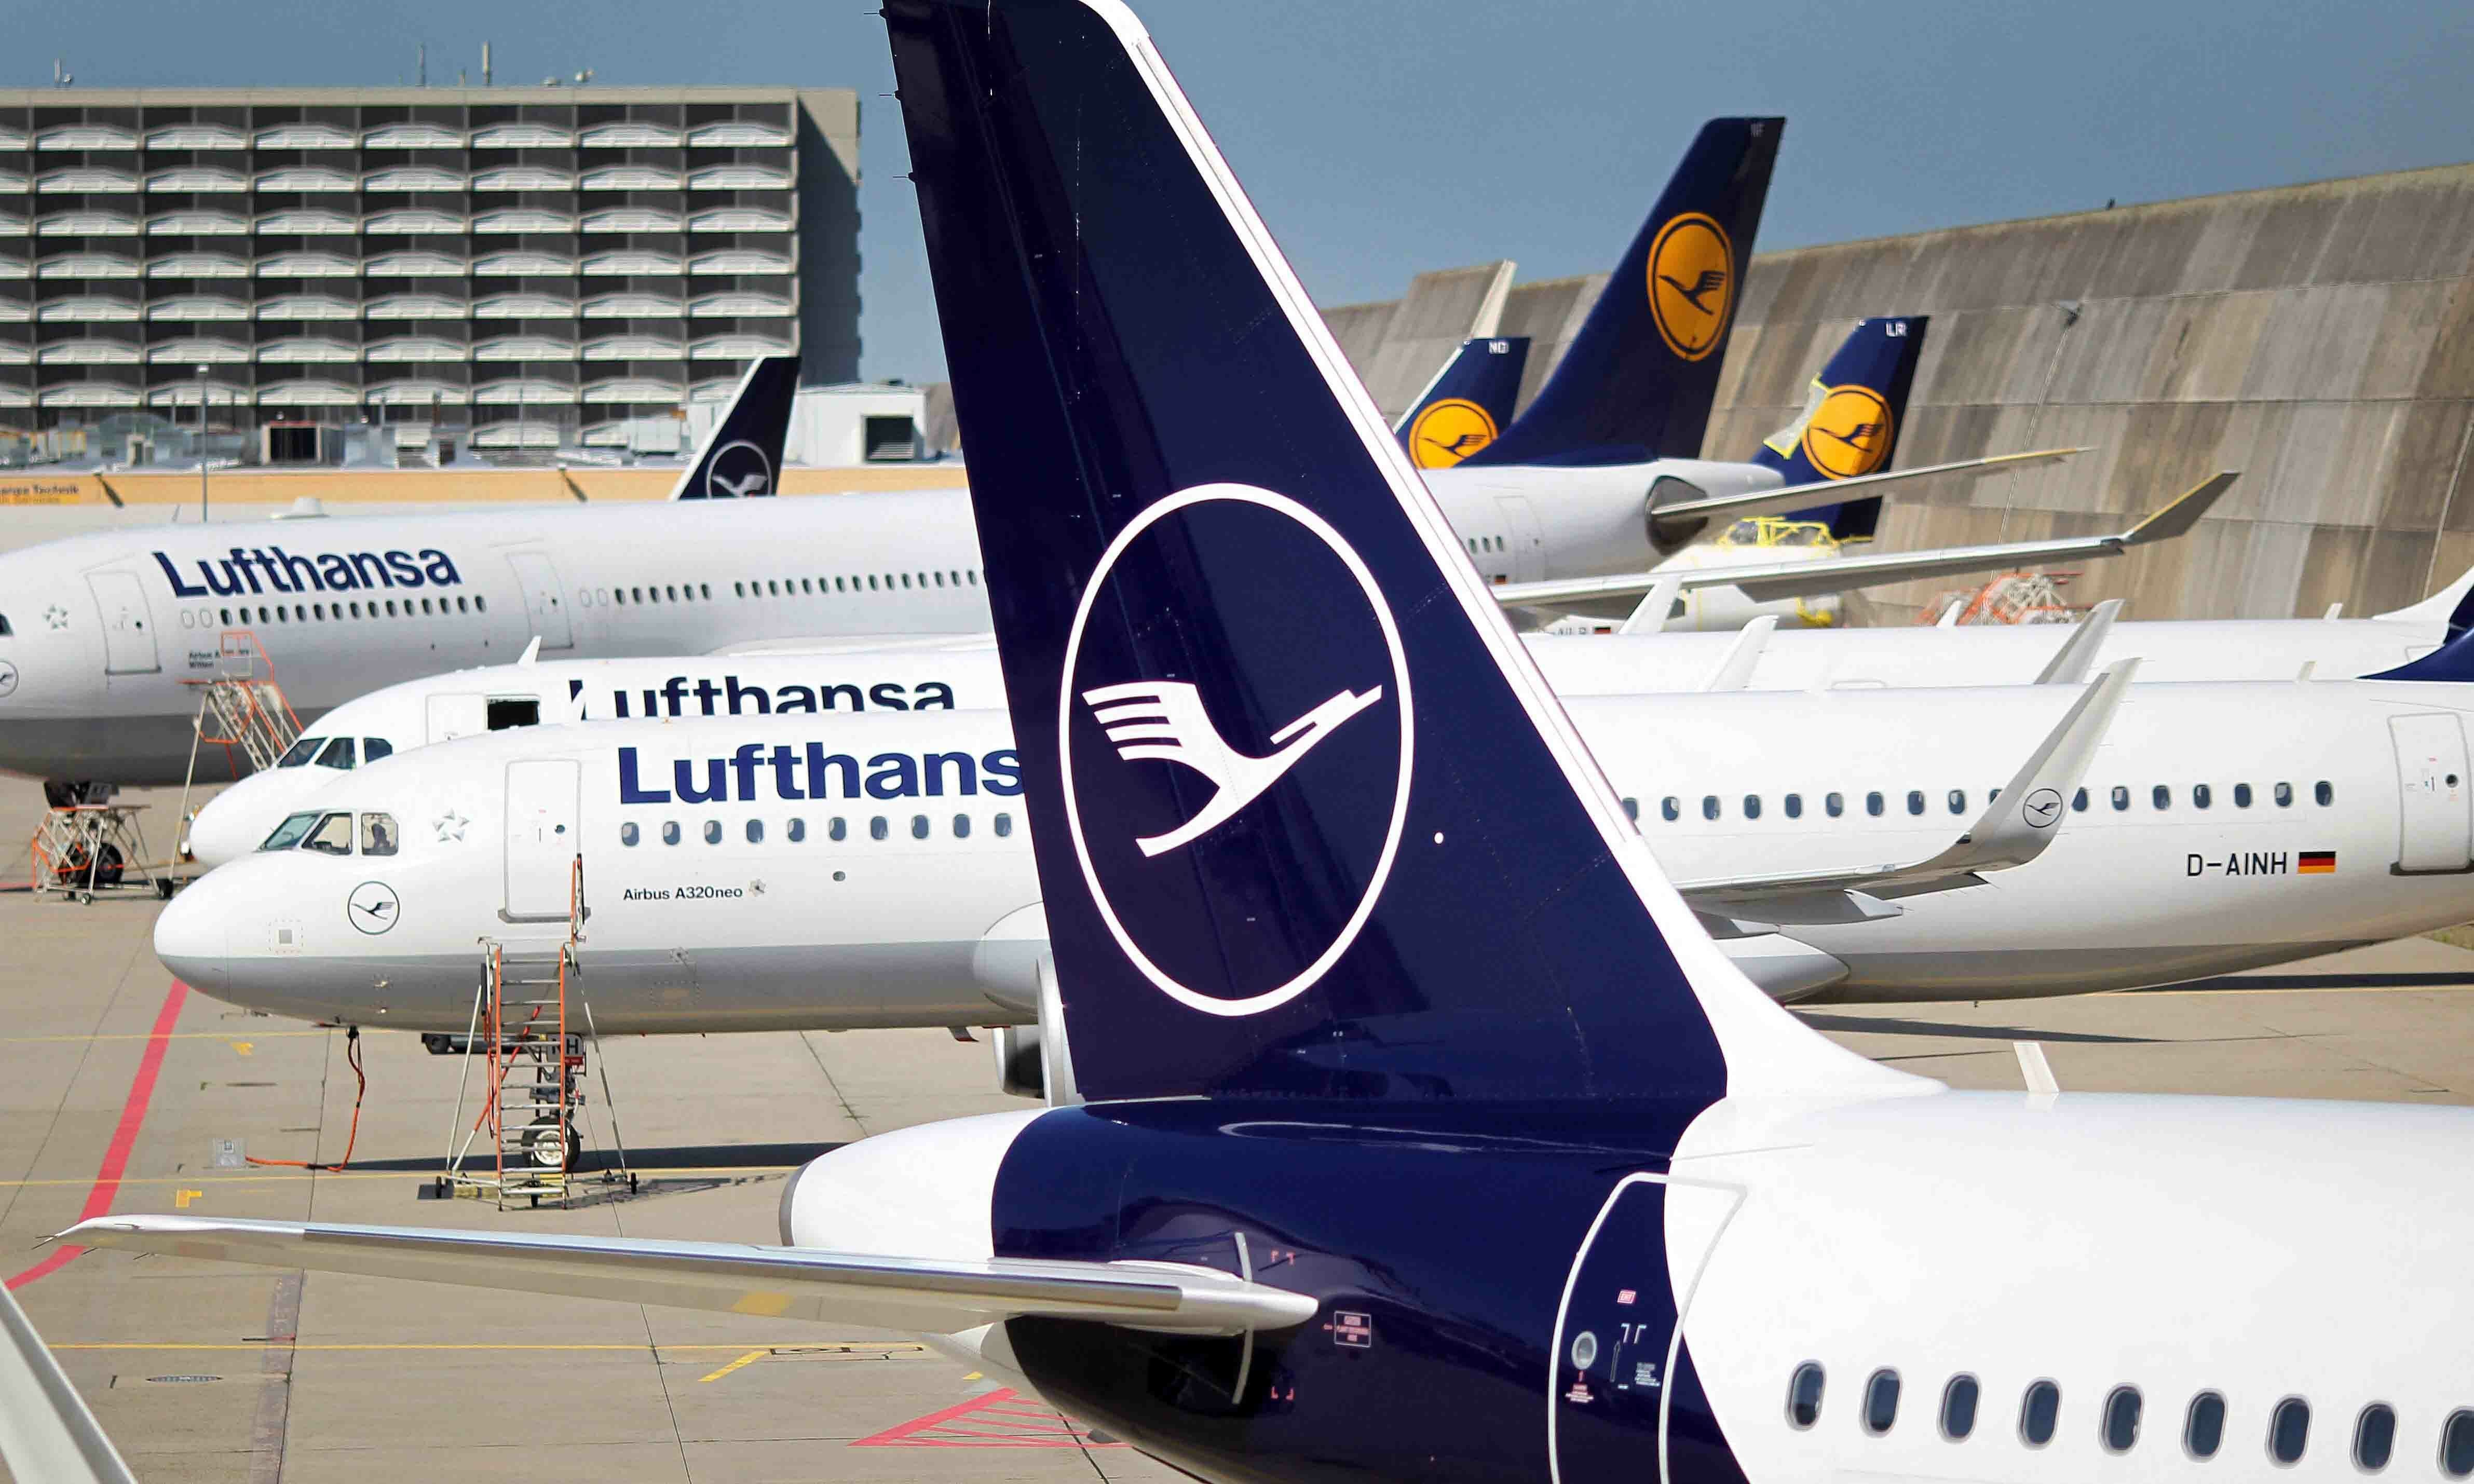 In this file photo taken on June 25, 2020 aircrafts of German airline Lufthansa stand at the airport in Frankfurt am Main, western Germany. — AFP